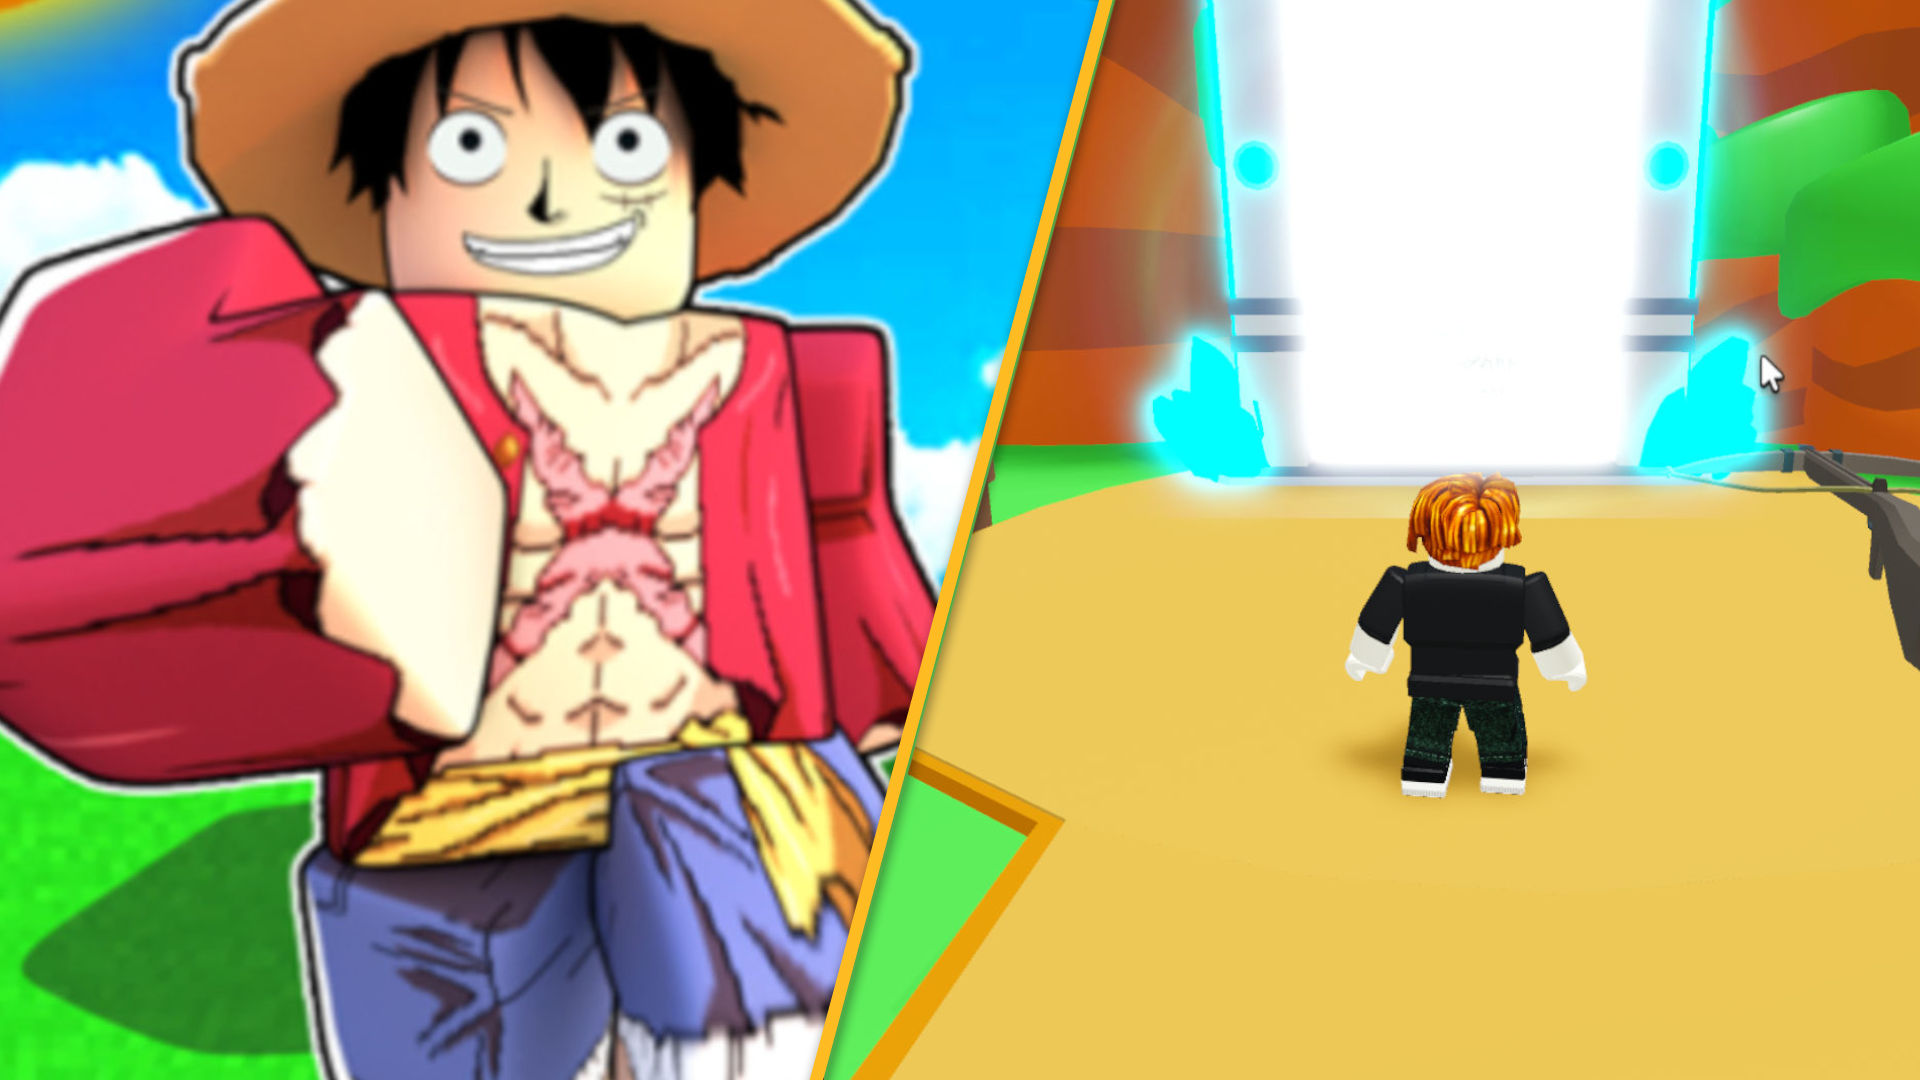 Roblox Anime Fighters Simulator codes for free Tokens, Boosts